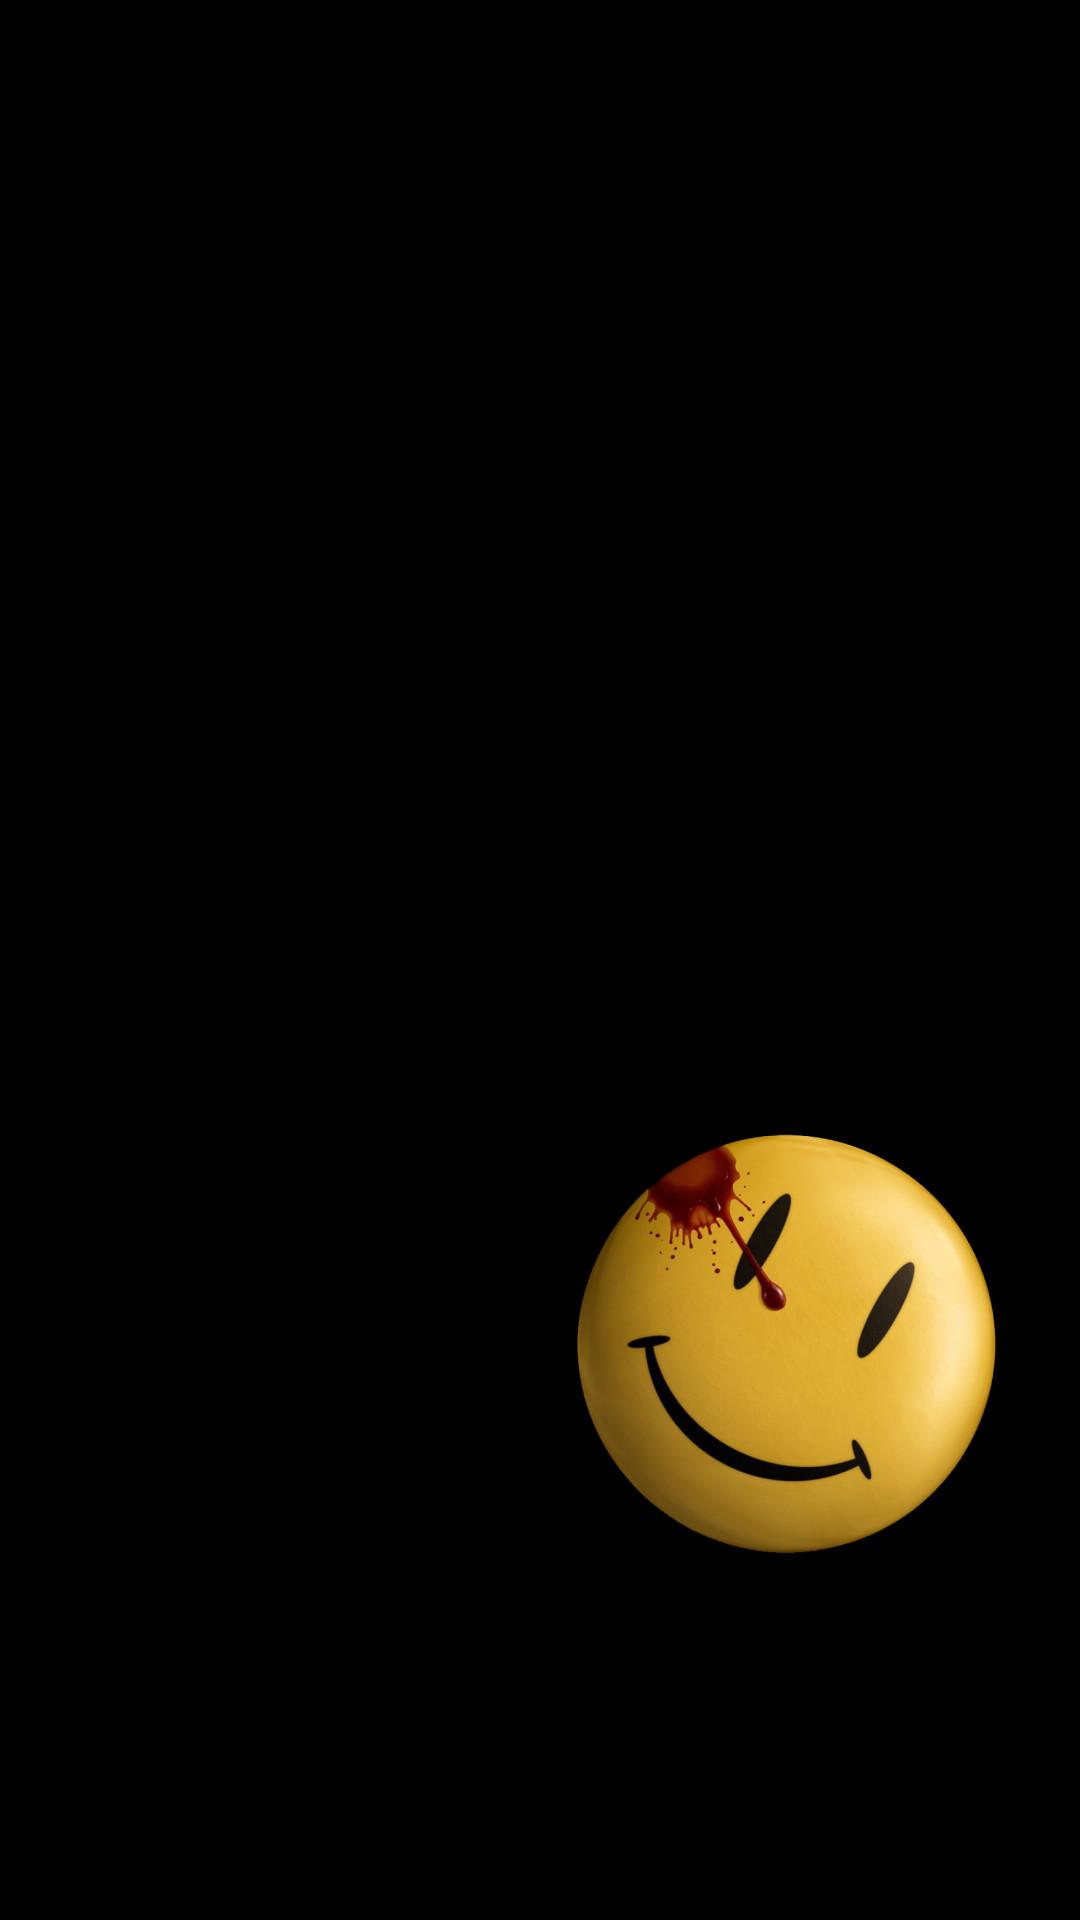 Dont know if theres already wallpapers for this but decided to turn this  beautiful panel into a wallpaper Enjoy  rWatchmen